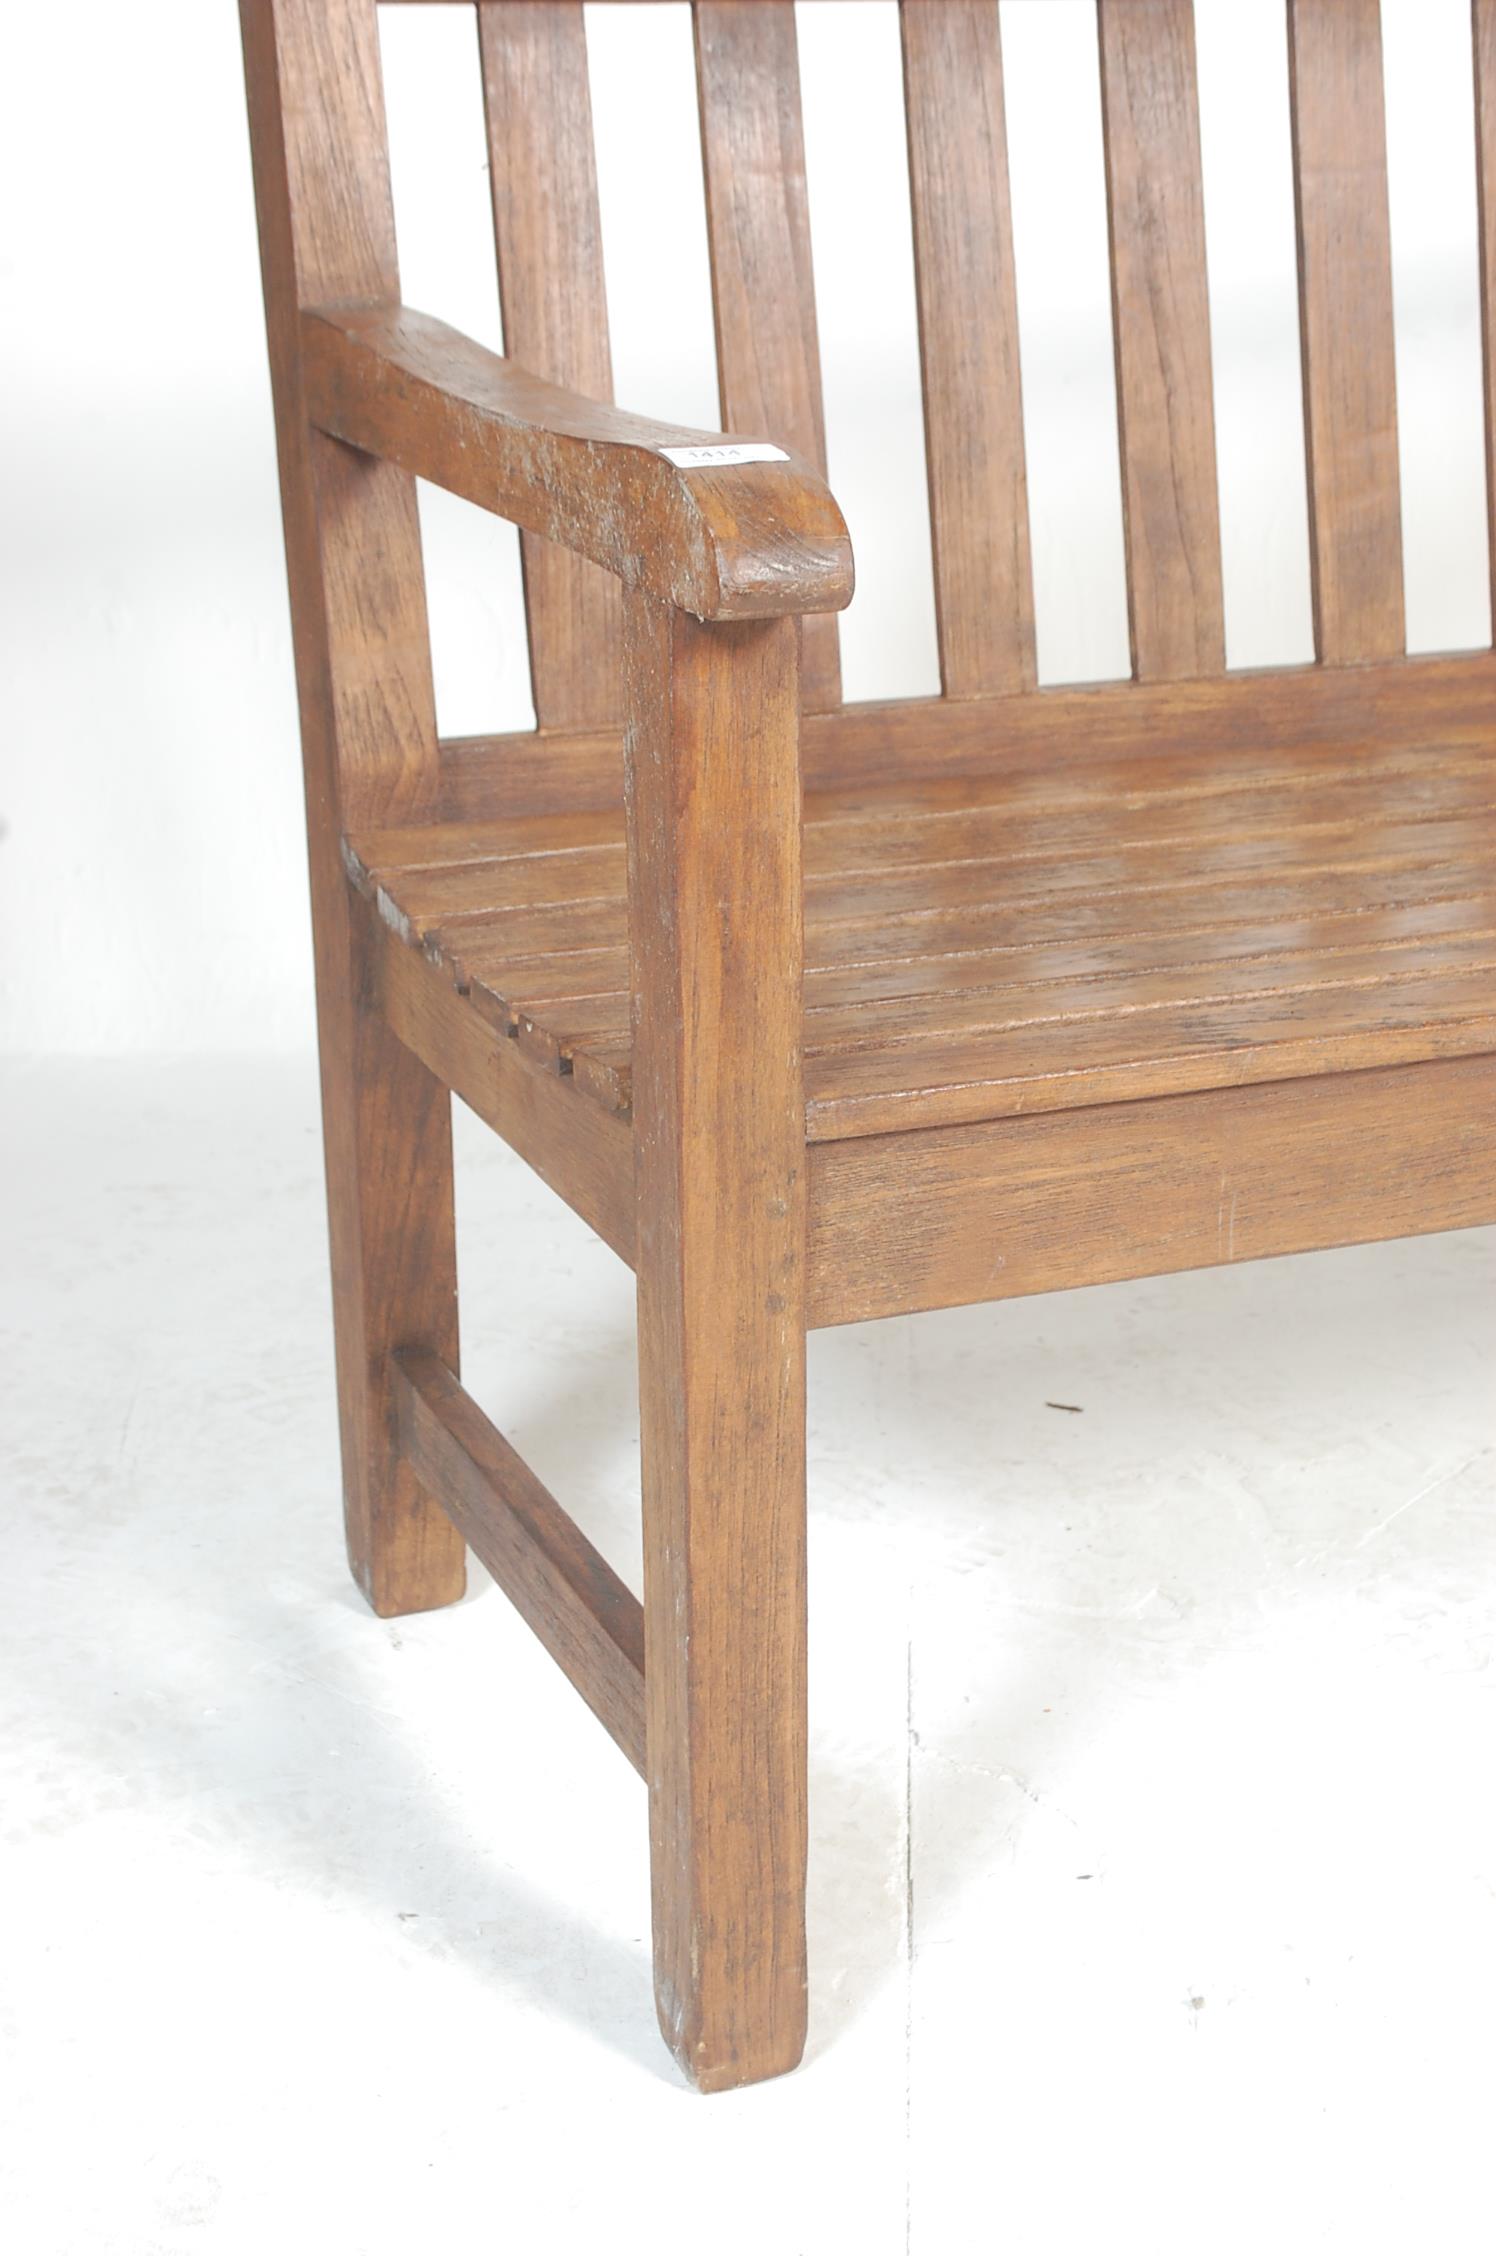 QUALITY CONTEMPORARY SOLID TEAK GARDEN BENCH - Image 2 of 6